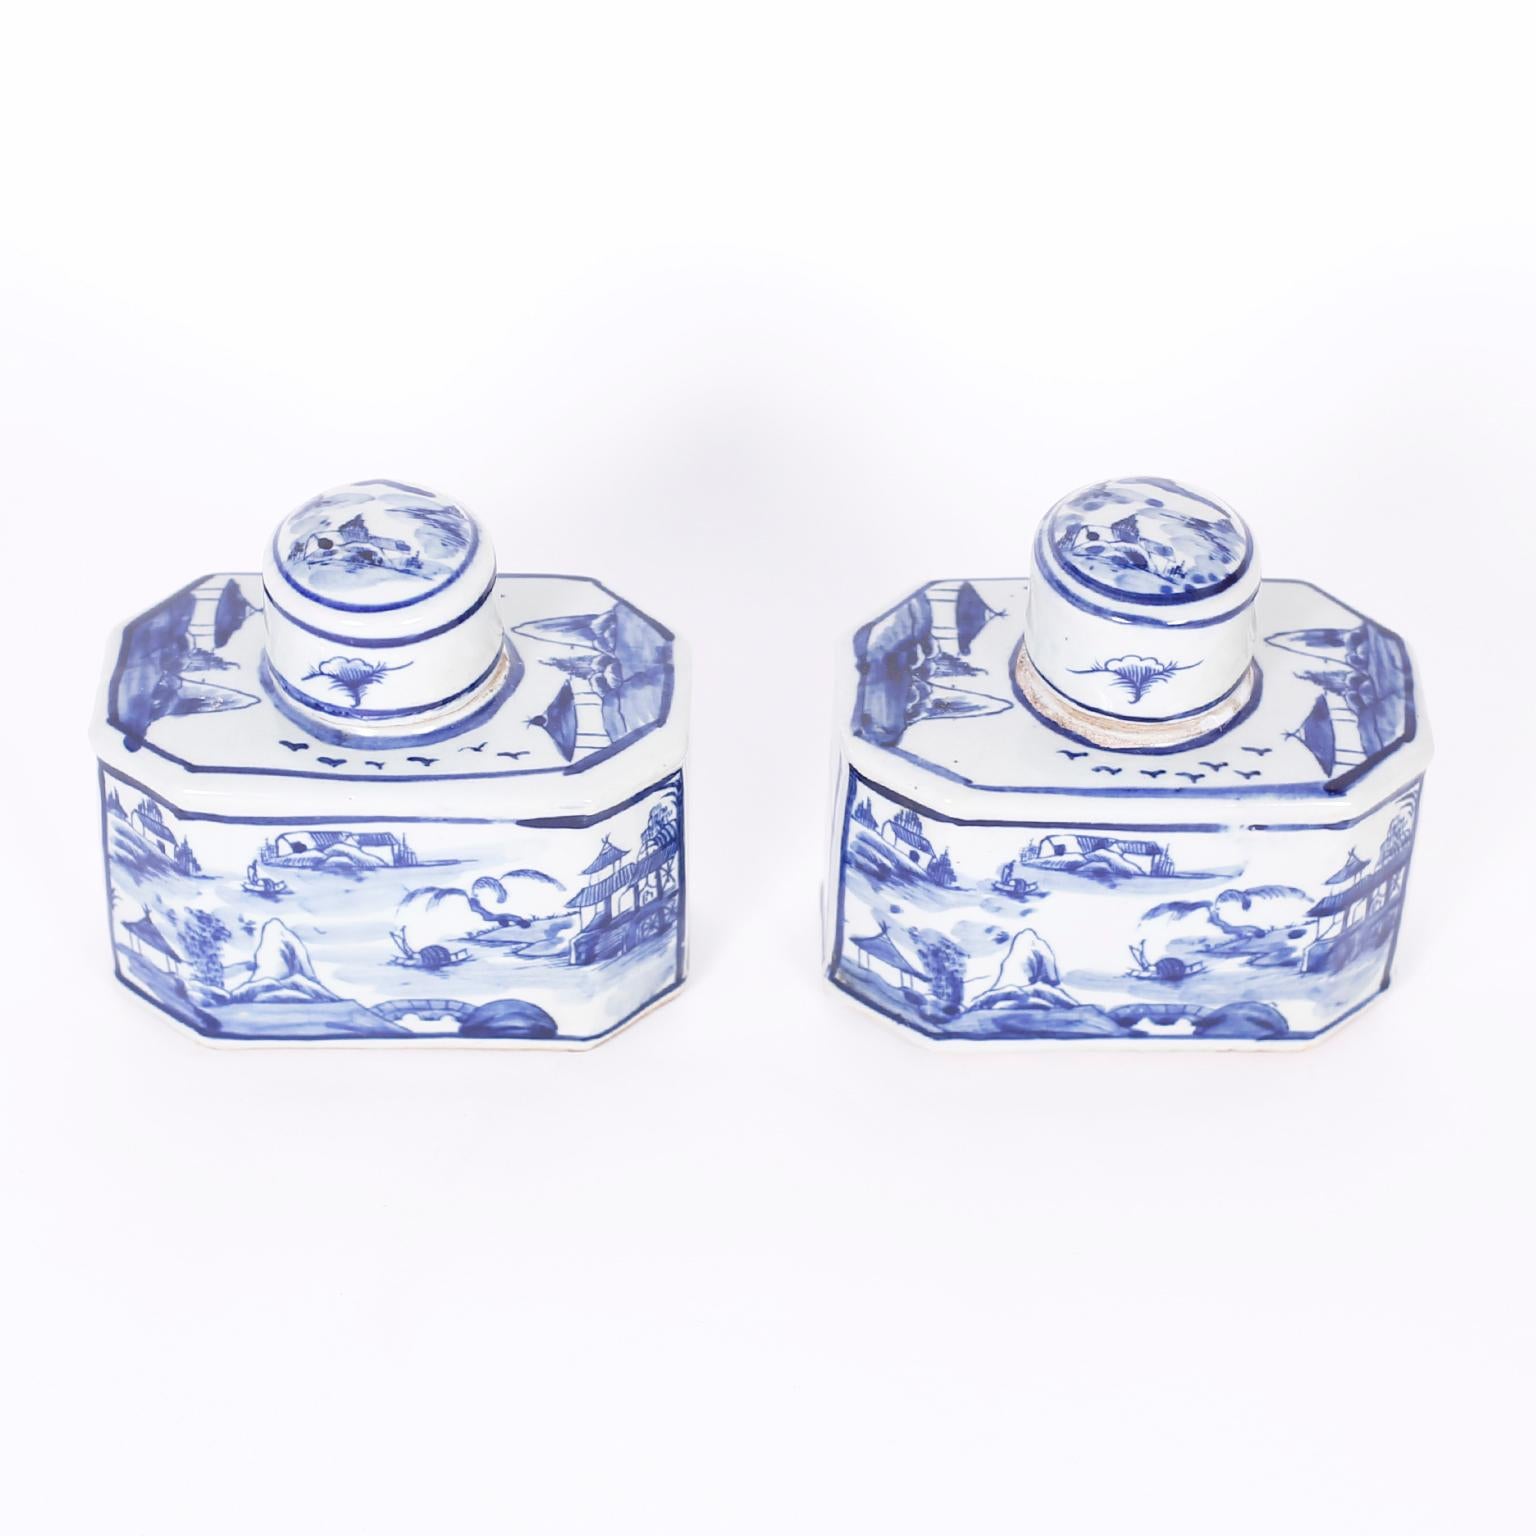 Pair of classic Chinese blue and white porcelain tea caddies with an unusual octagon form hand decorated with landscapes and waterways.